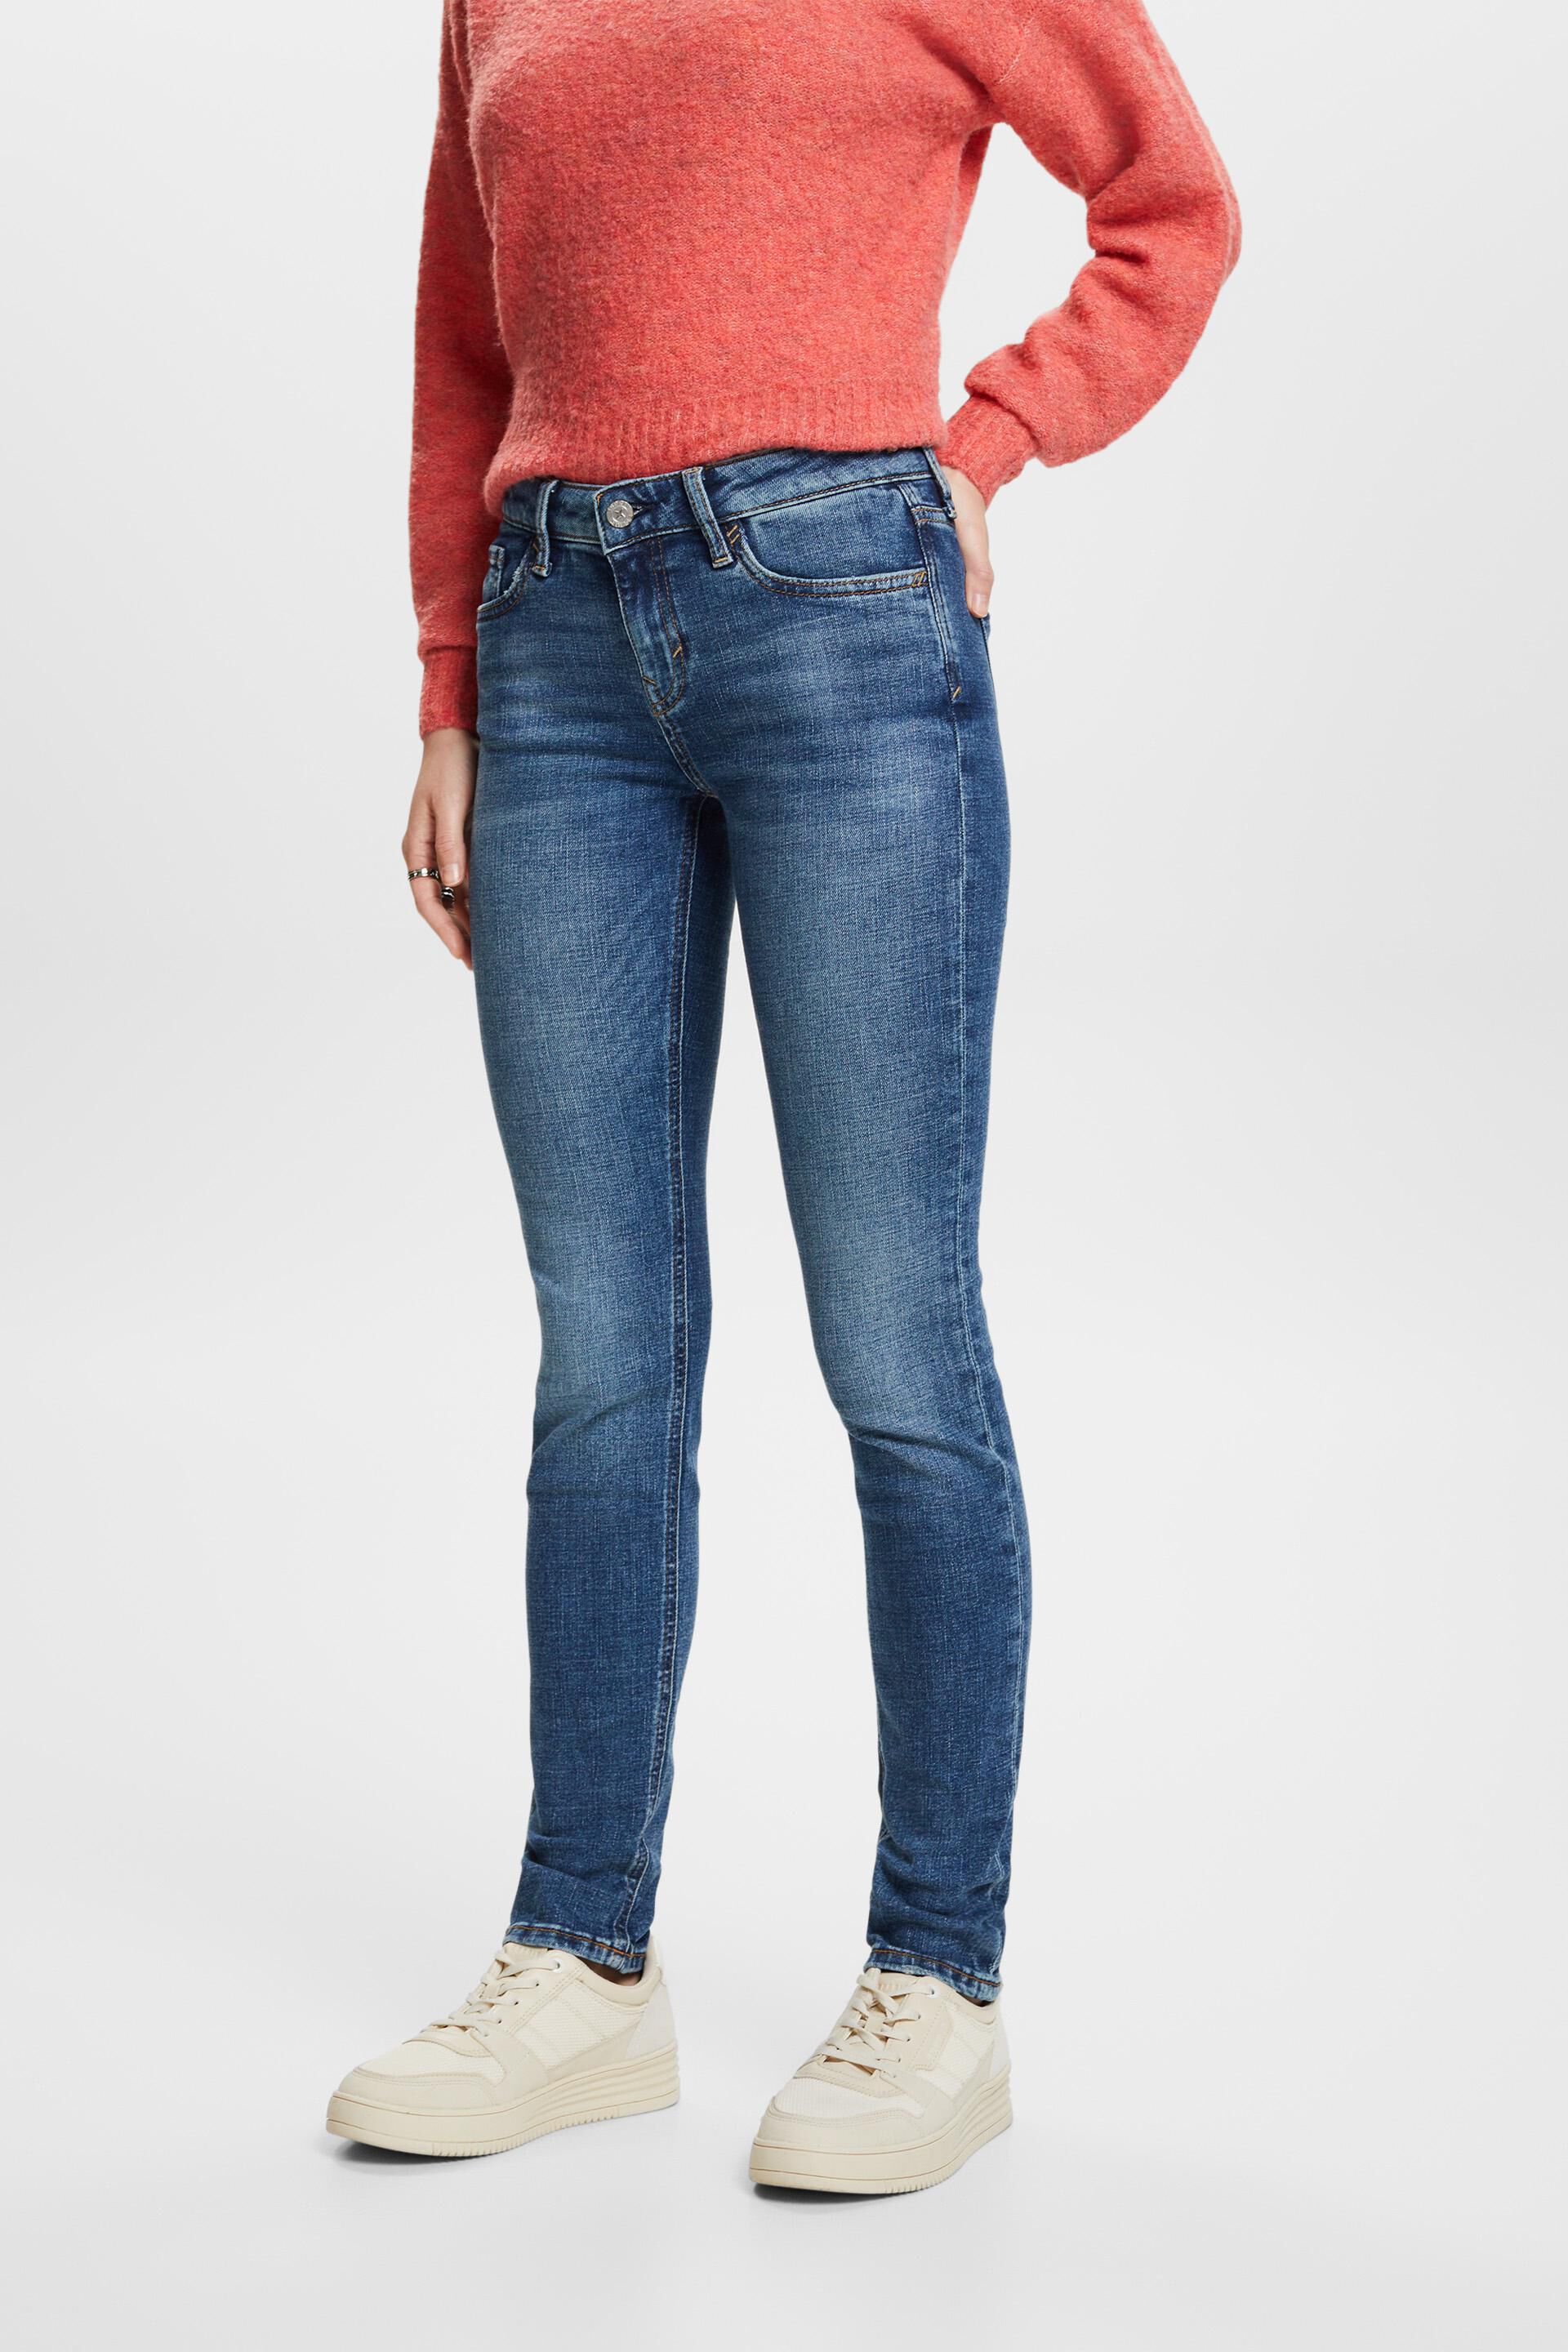 Esprit slim mid-rise stretch jeans fit Recycled: